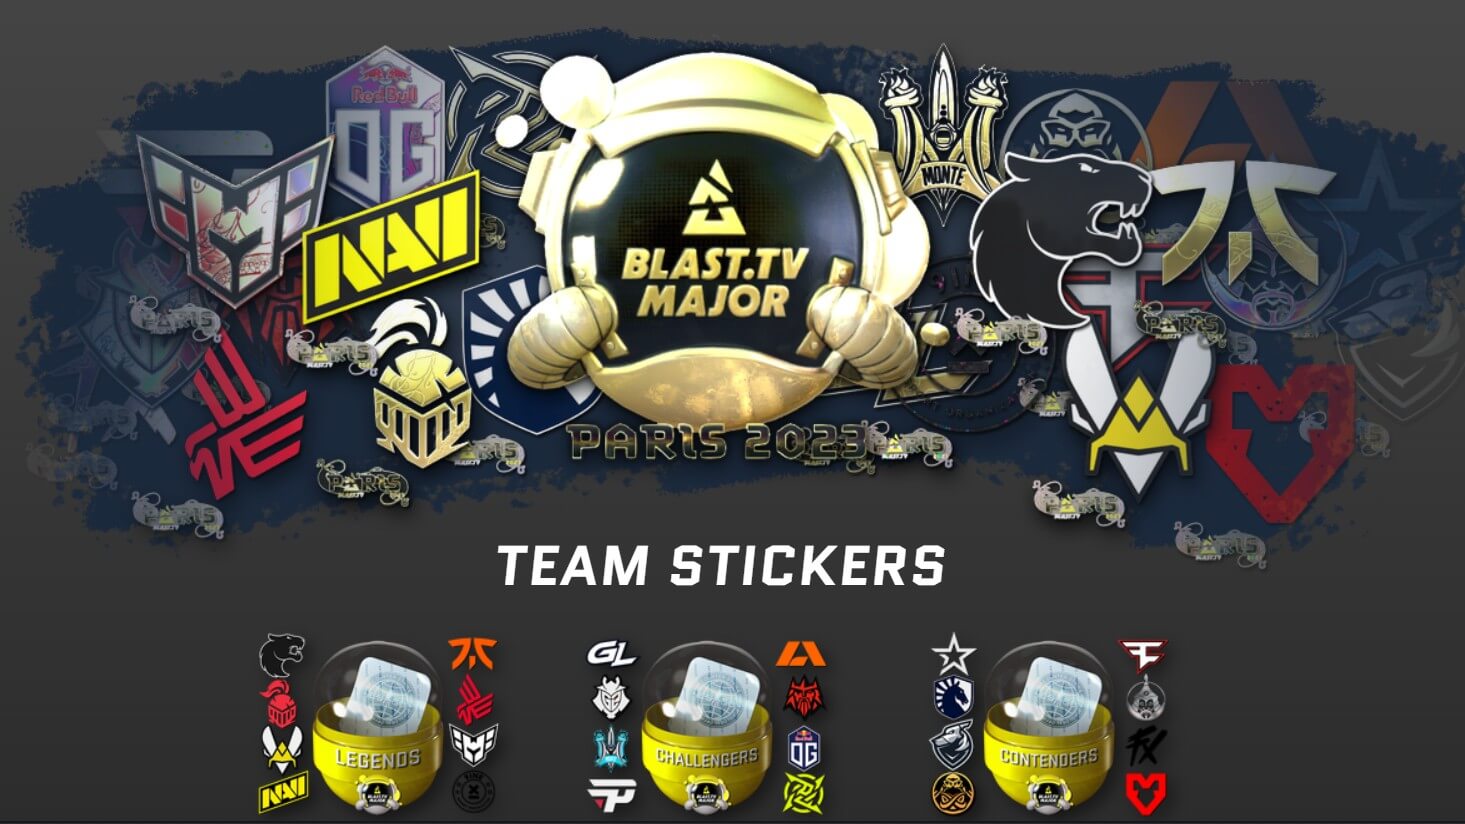 The new stickers for the Paris Major 2023